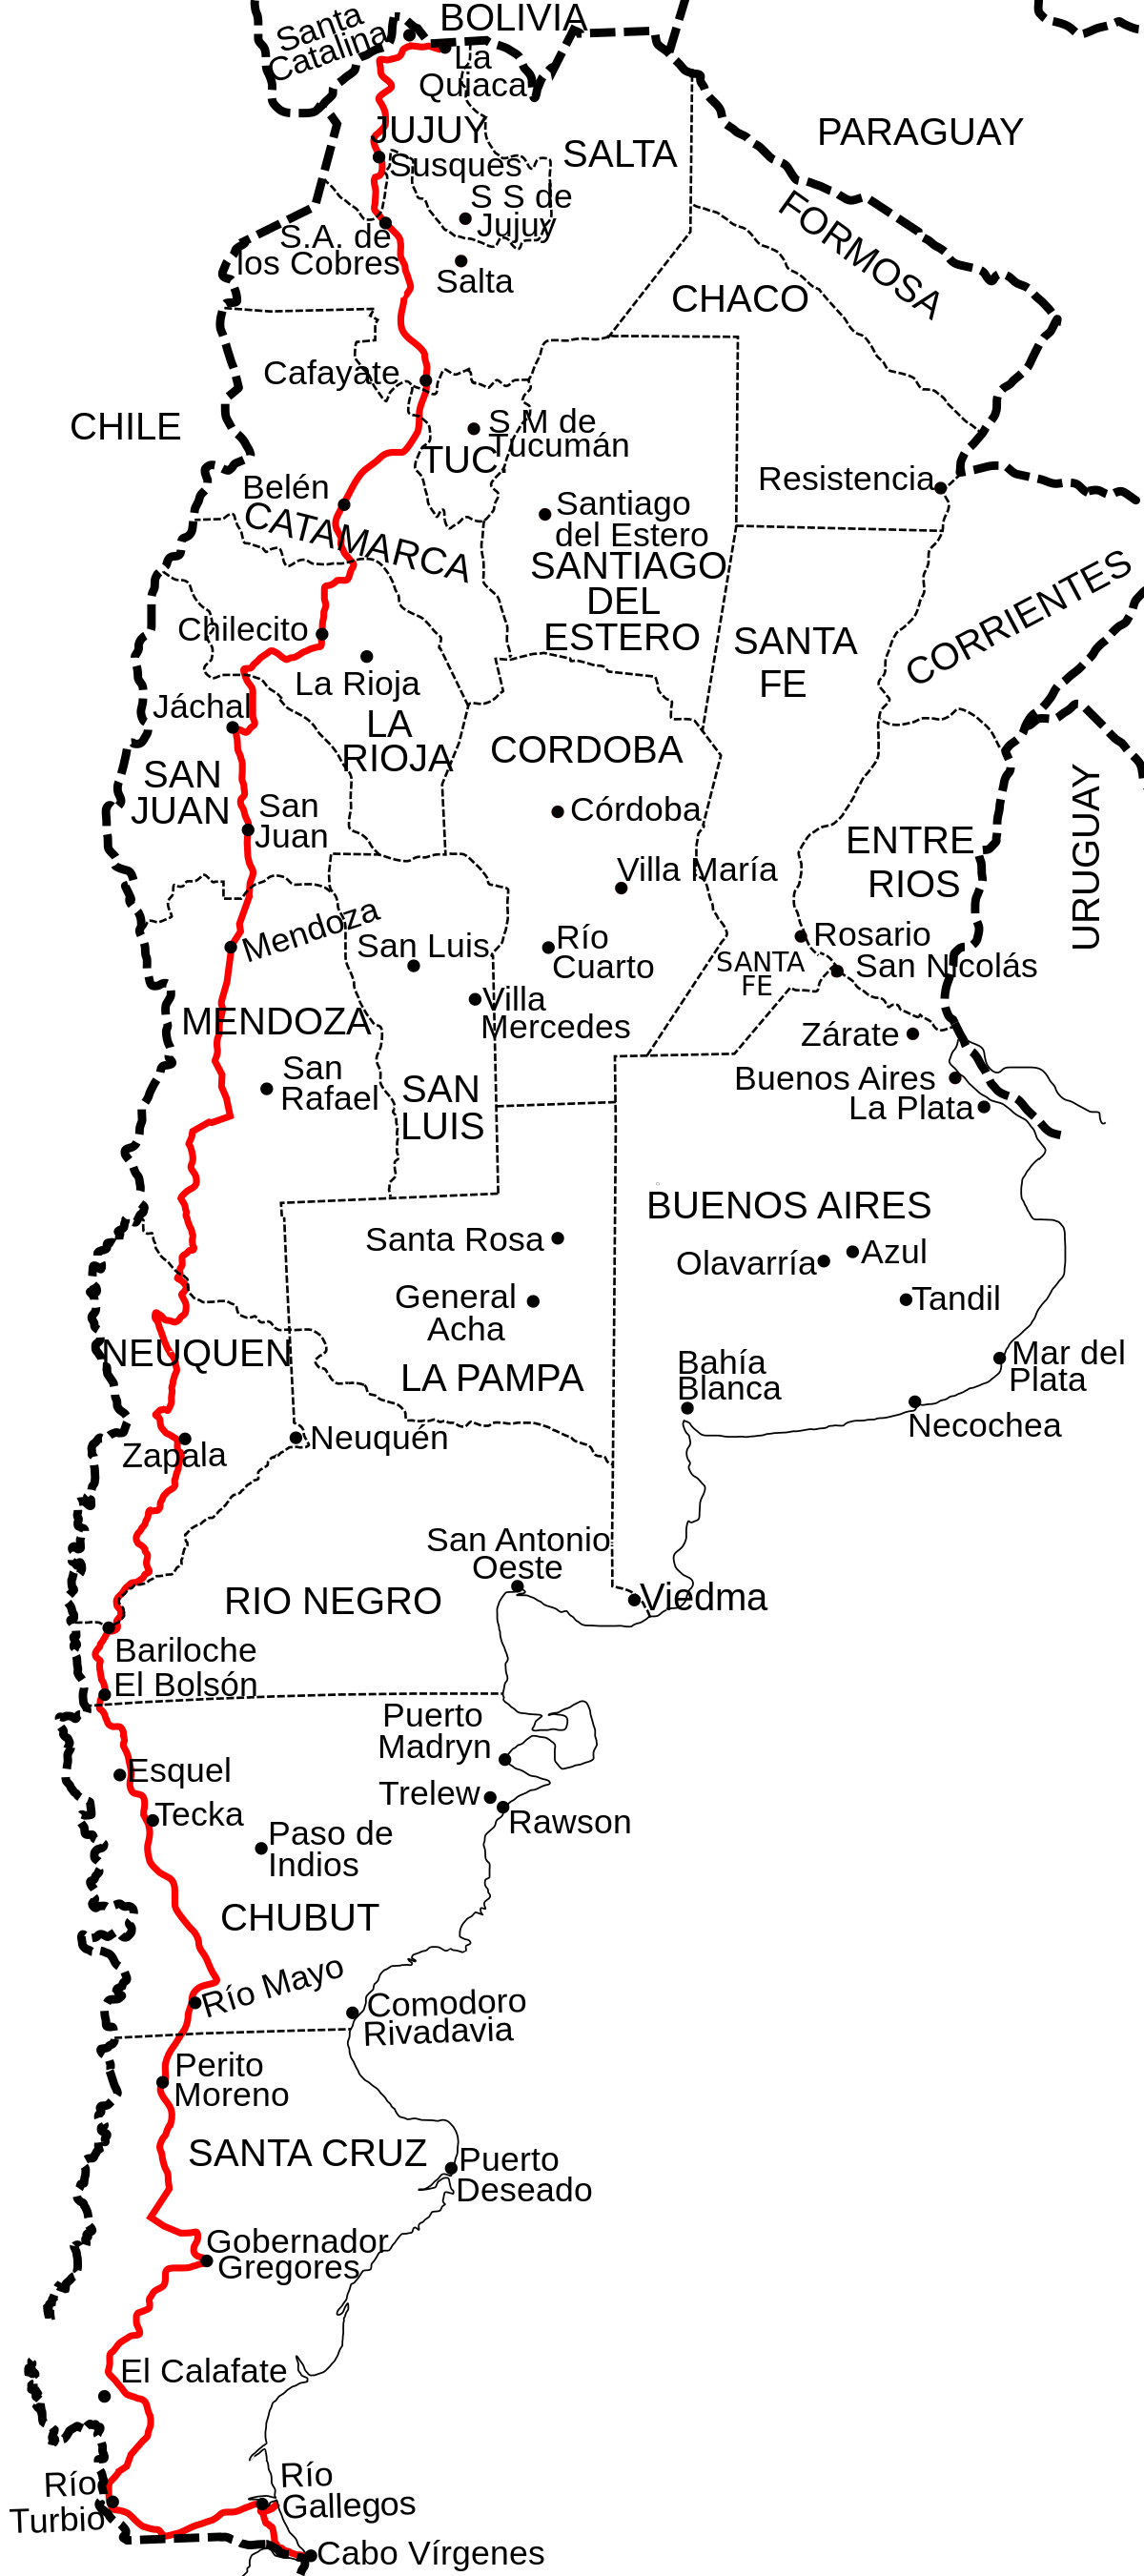 route 40 argentine carte Route Nationale 40 Argentine Wikipedia route 40 argentine carte